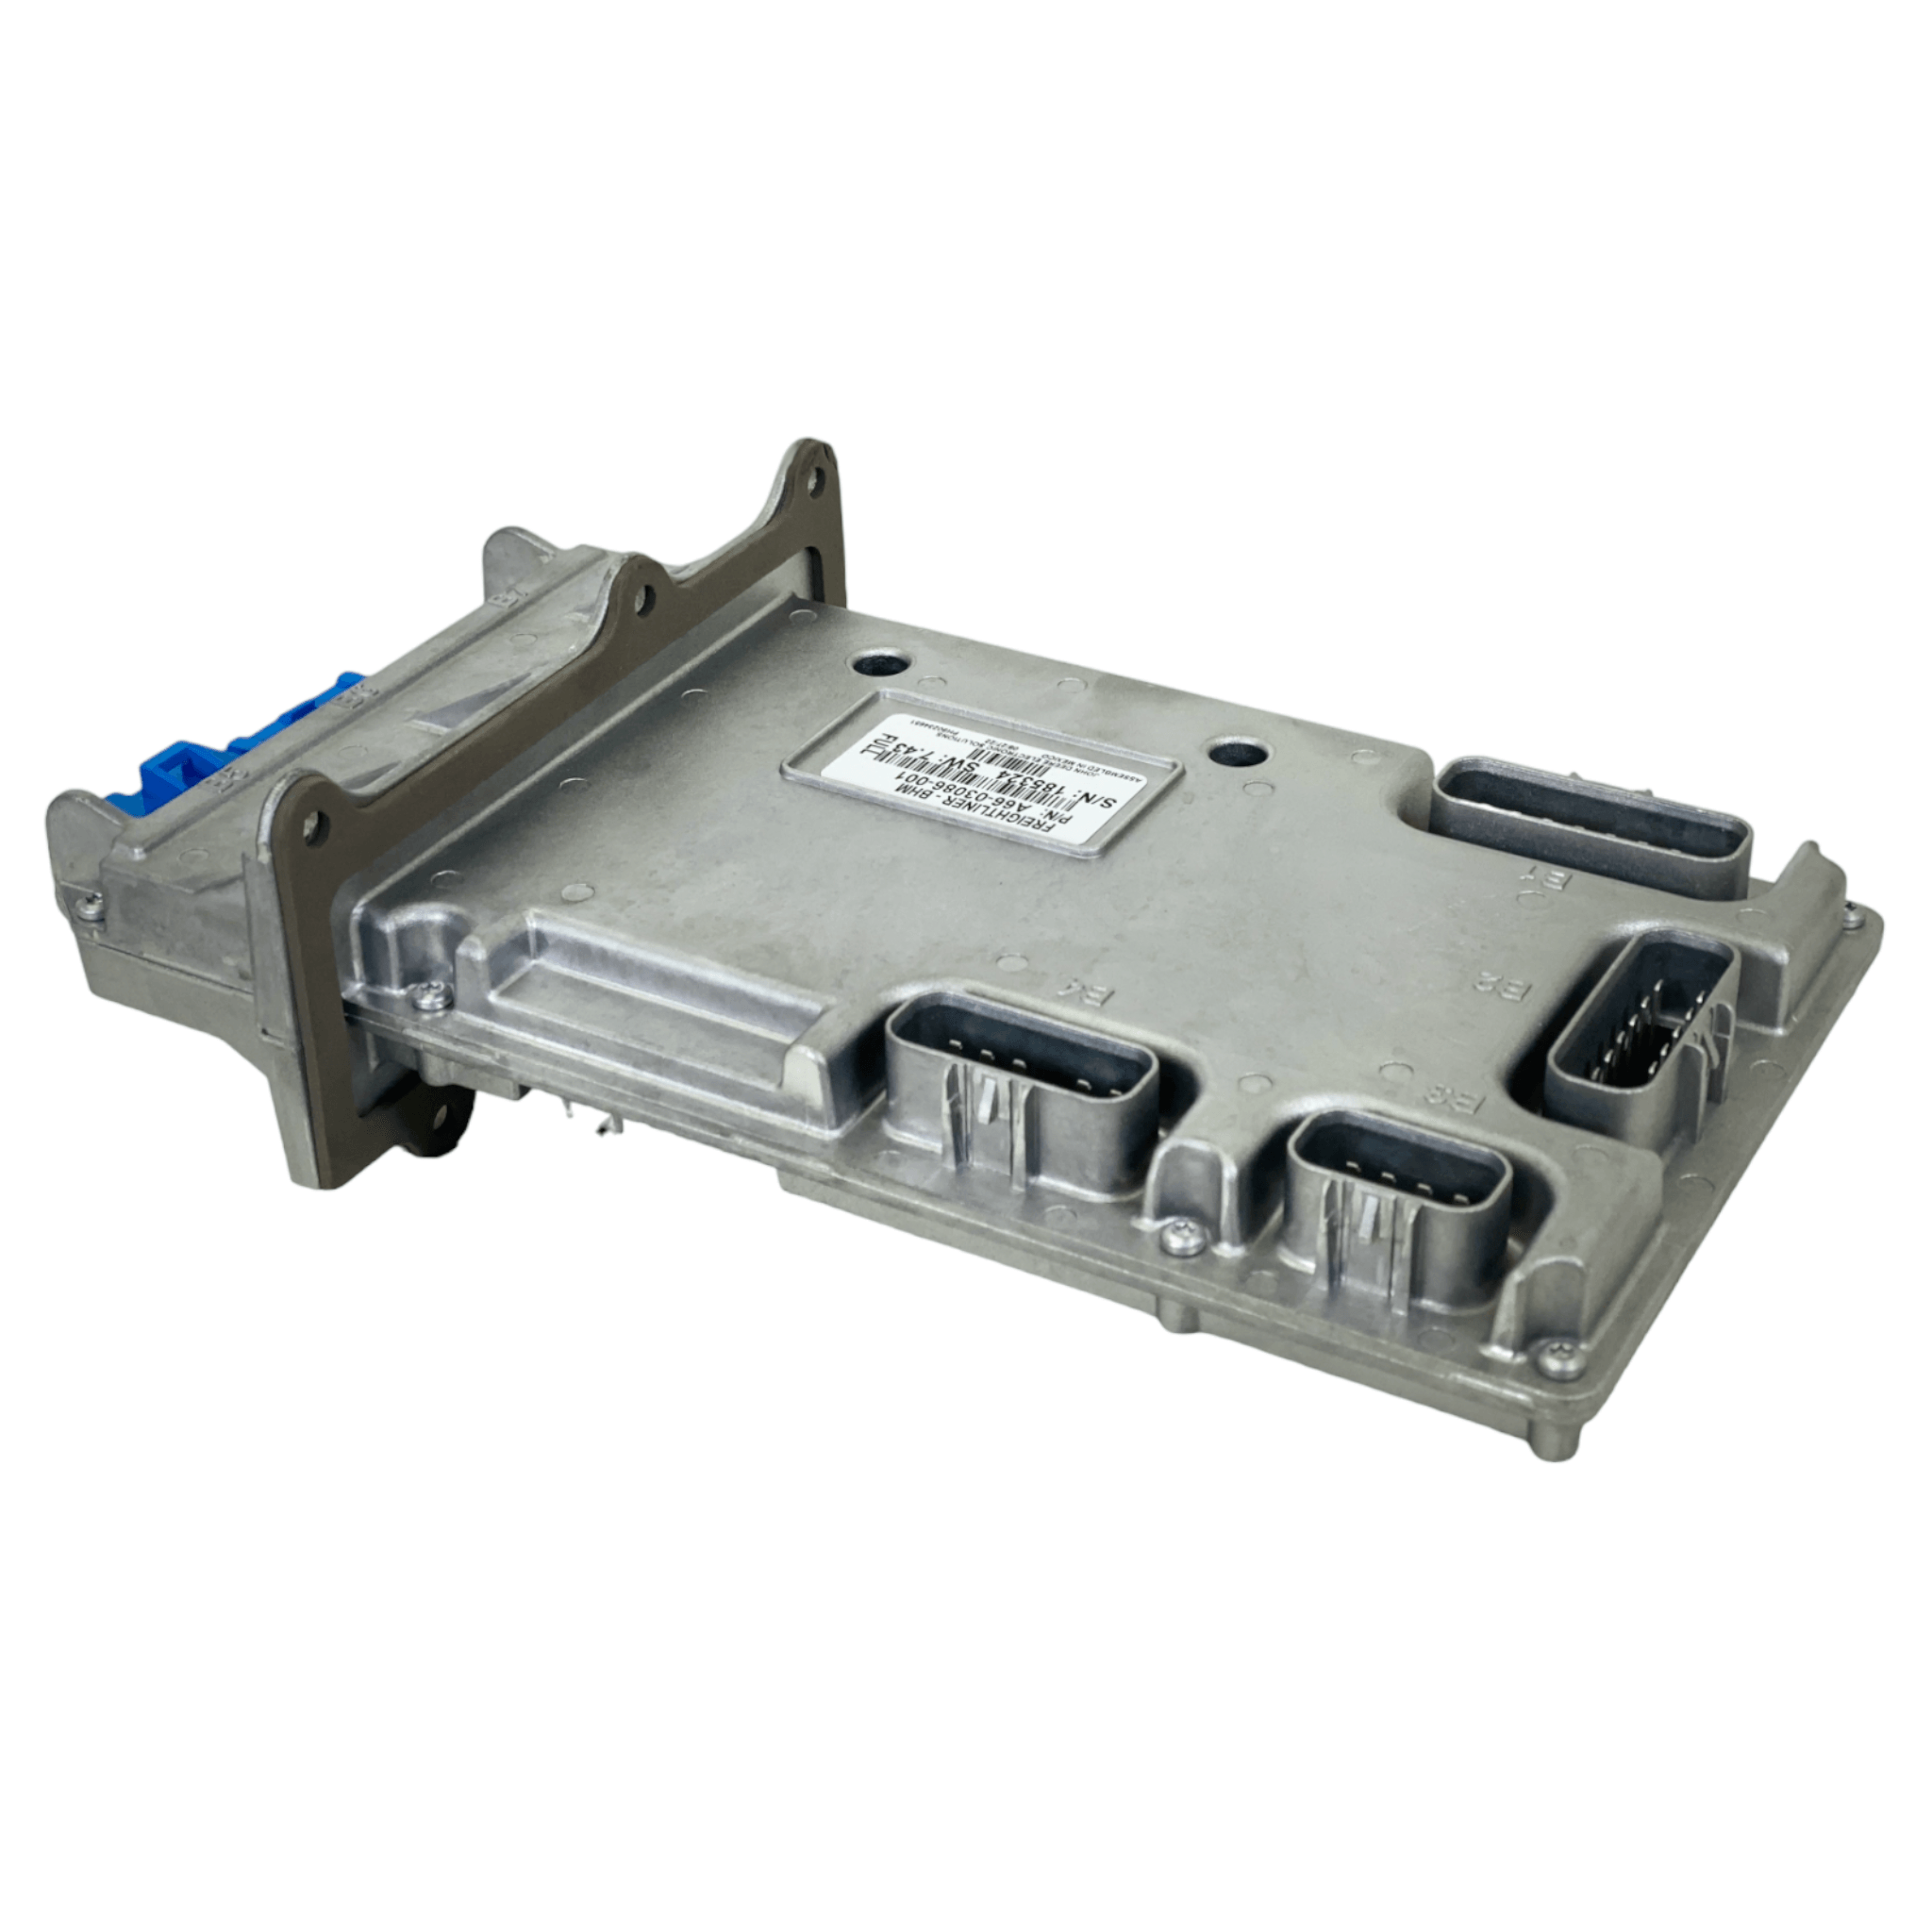 A66-03086-000 Genuine Freightliner Module-Bh For Freightliner M2 - ADVANCED TRUCK PARTS